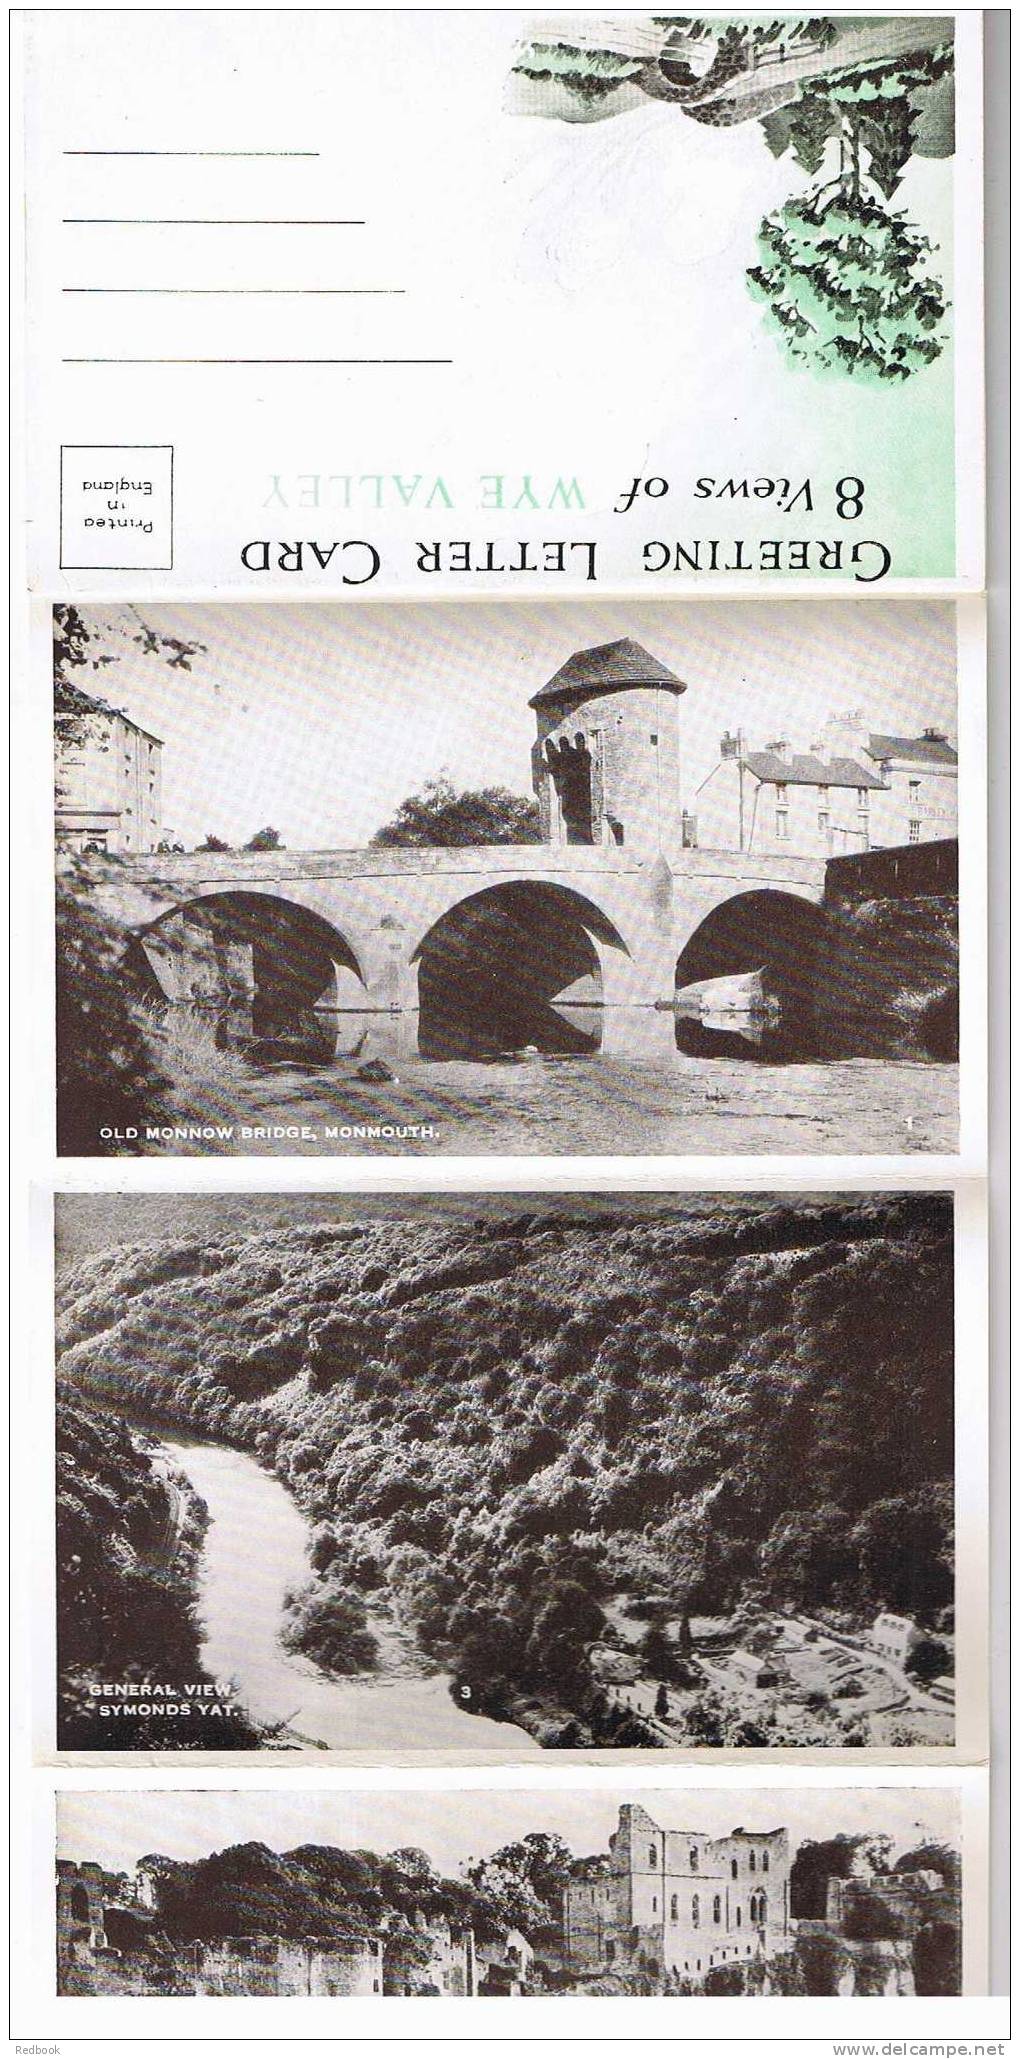 RB 693 - Unused Letter Card 8 Views Of Wye Valley Monmouthshire Wales - Monmouthshire